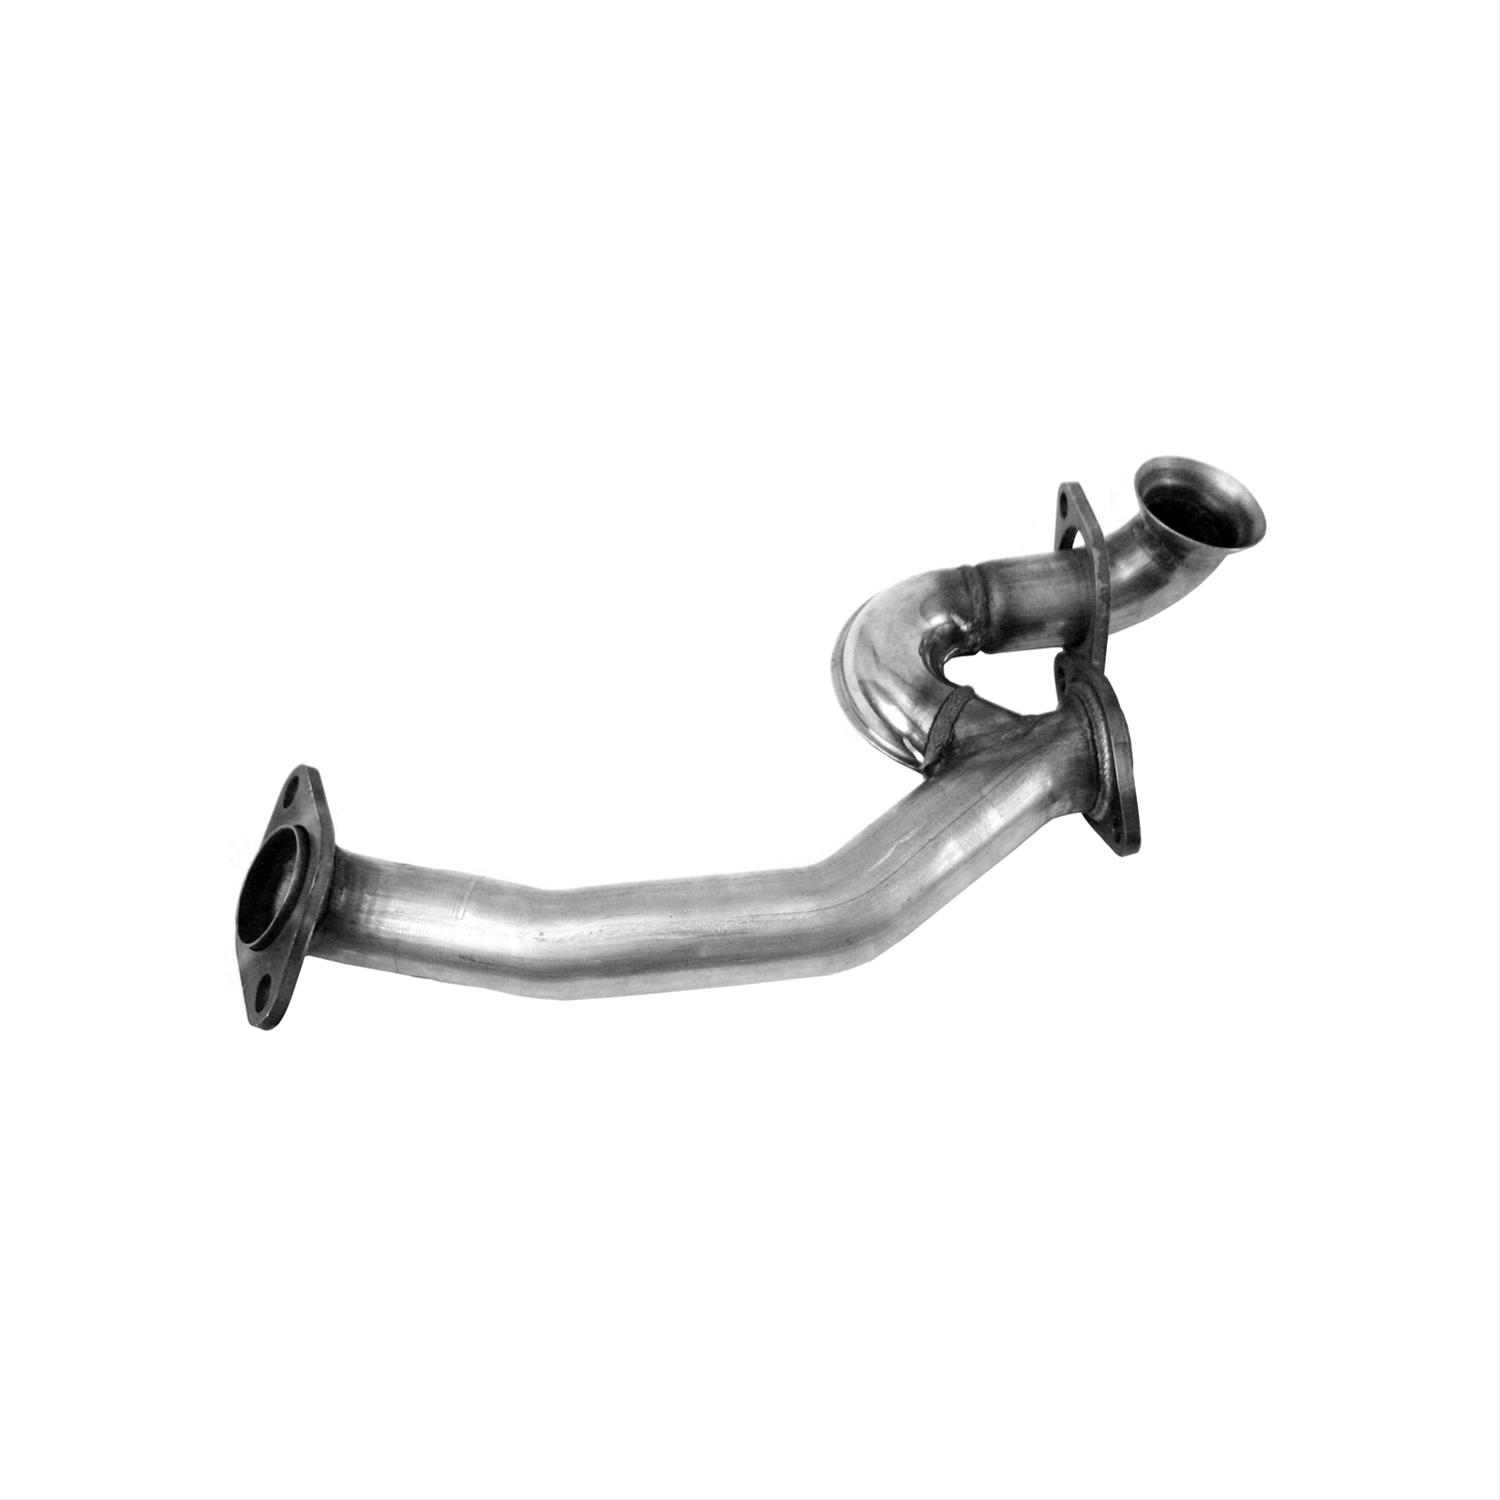 Exhaust Pipe-Extension Pipe Left Walker 43745 